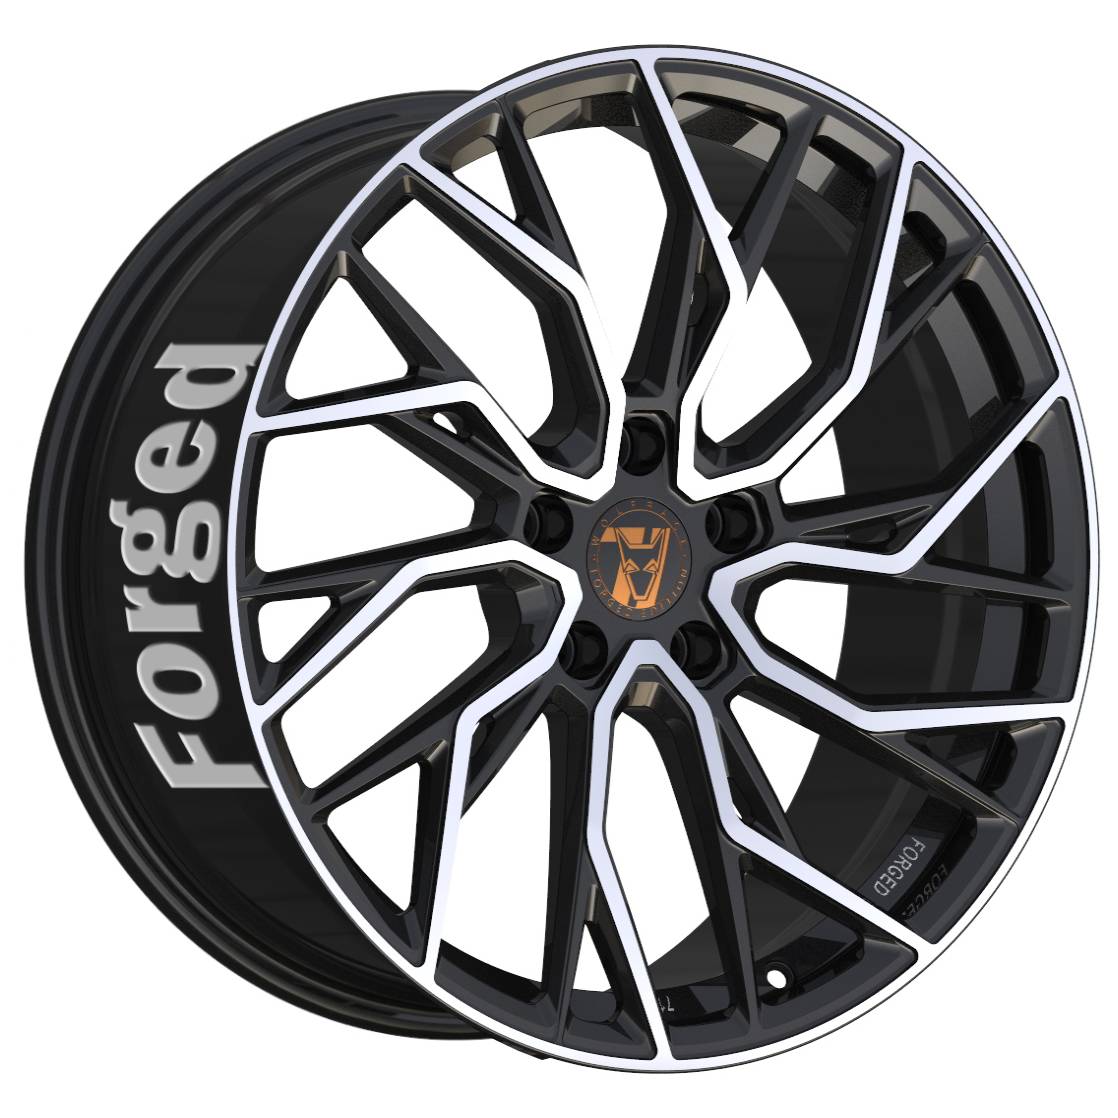 Jantes alu Demon Wheels 71 Forged Edition Voodoo Forged [13x24] -5x114.3- ET 45